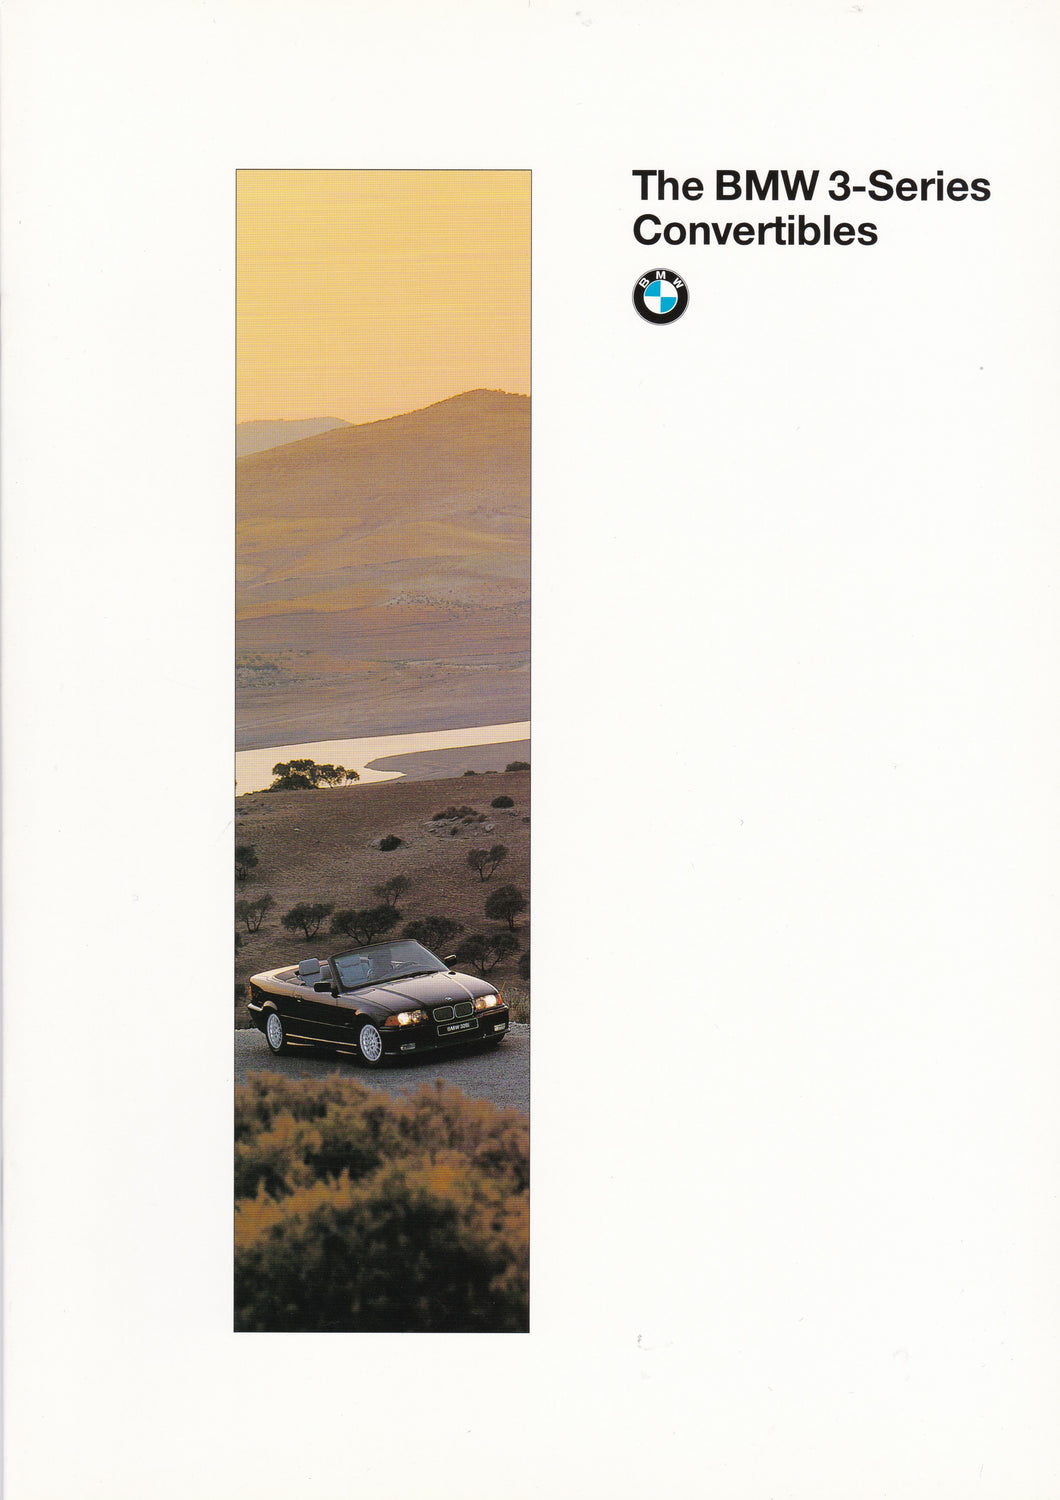 Brochure - The BMW 3-Series Convertibles - 1996